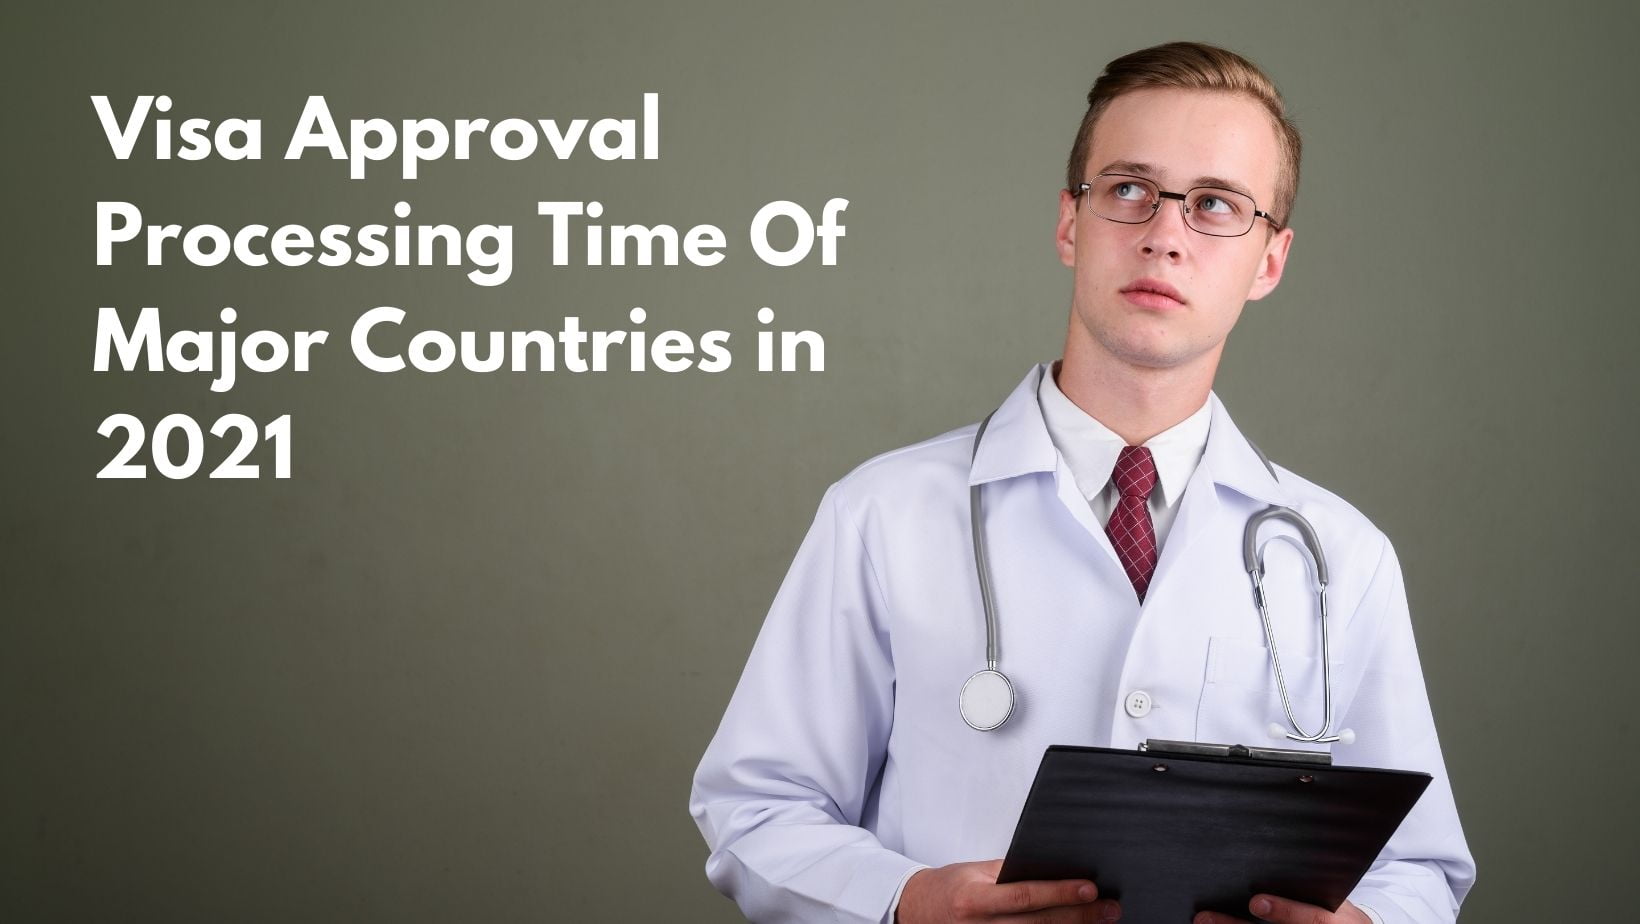 Visa Approval Processing Time Of Major Countries In 2021